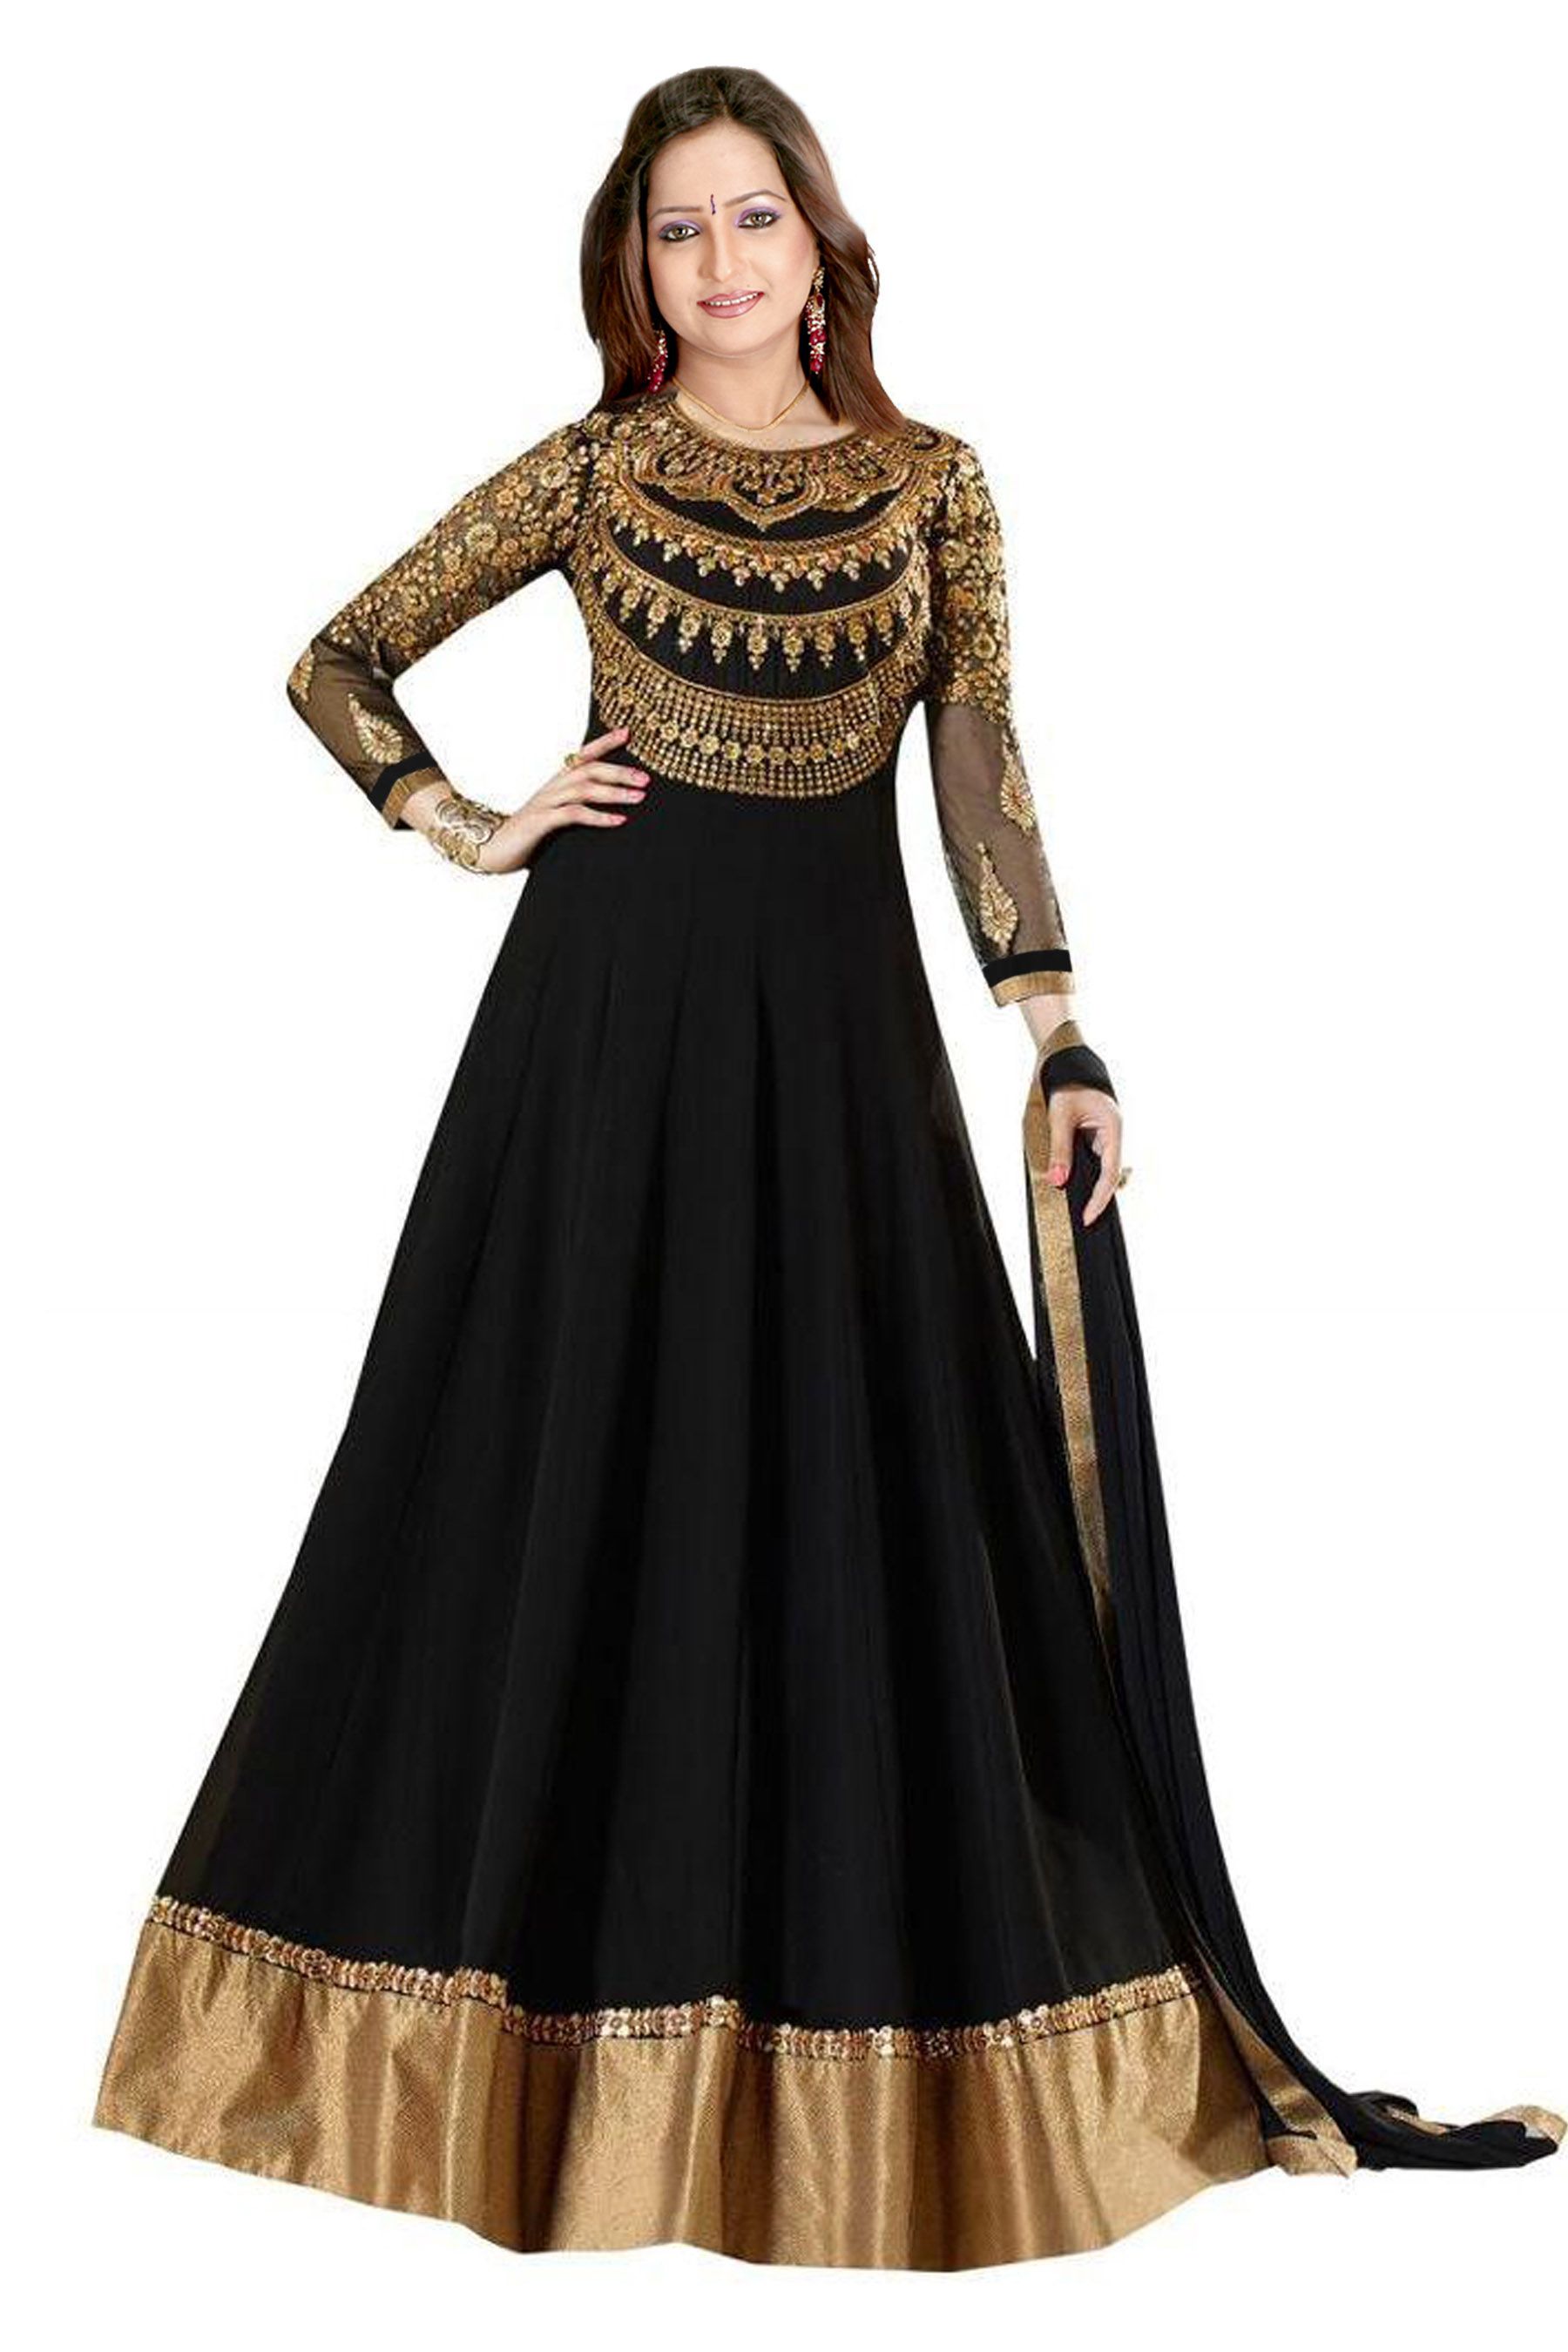 Rationalization Way Unexpected Rp Boutique Brown and Black Georgette Anarkali Gown Semi-Stitched Suit -  Buy Rp Boutique Brown and Black Georgette Anarkali Gown Semi-Stitched Suit  Online at Best Prices in India on Snapdeal